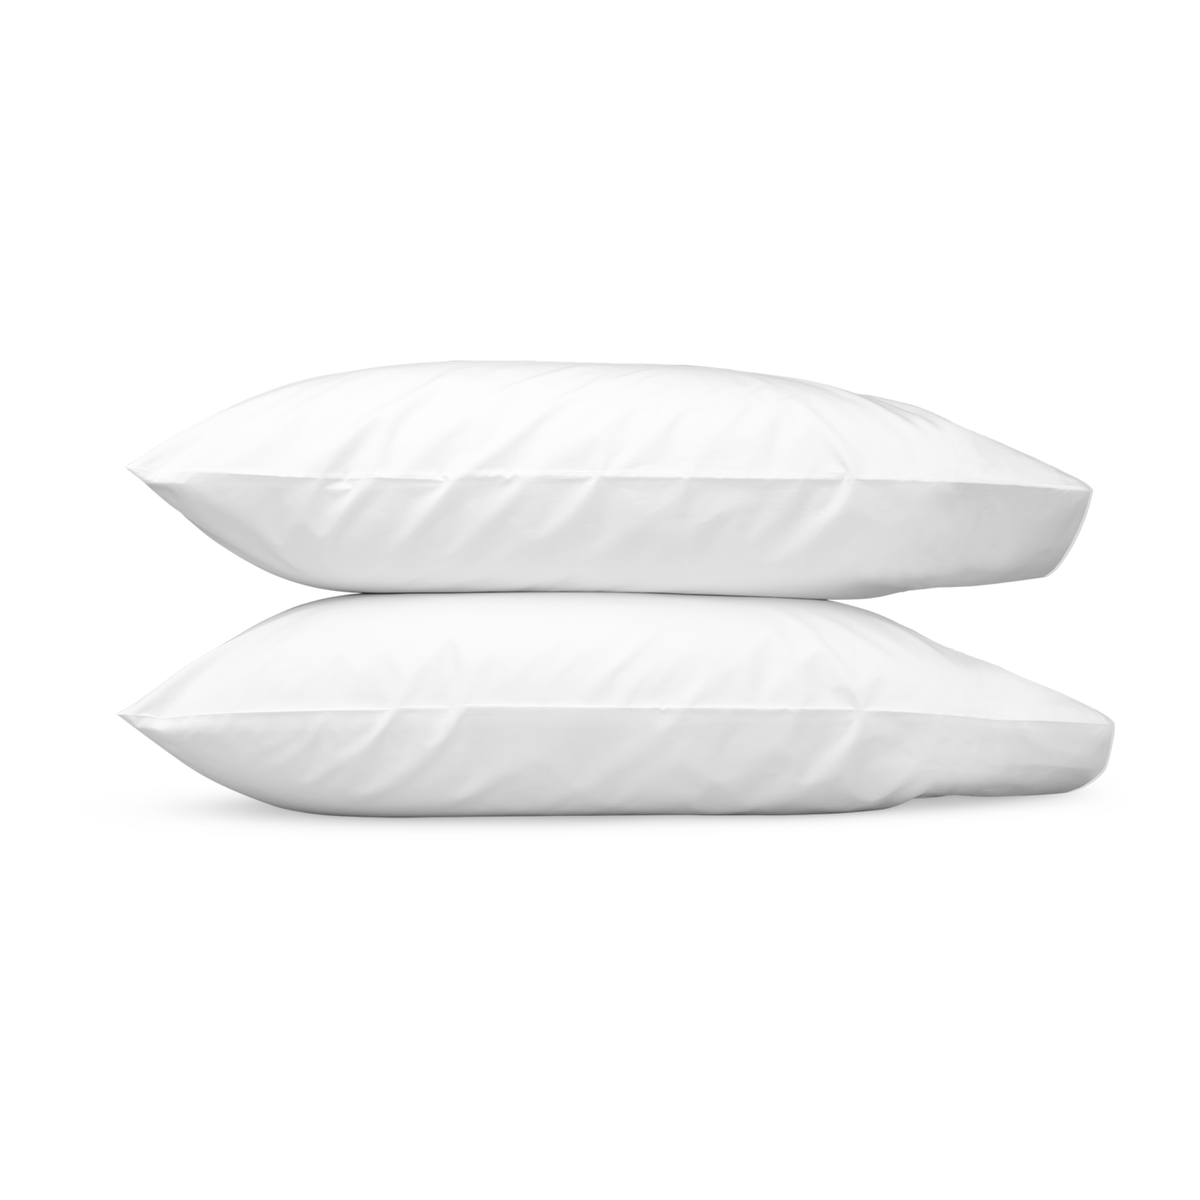 Pair of Pillowcases of Matouk Bryant Bedding in White Color